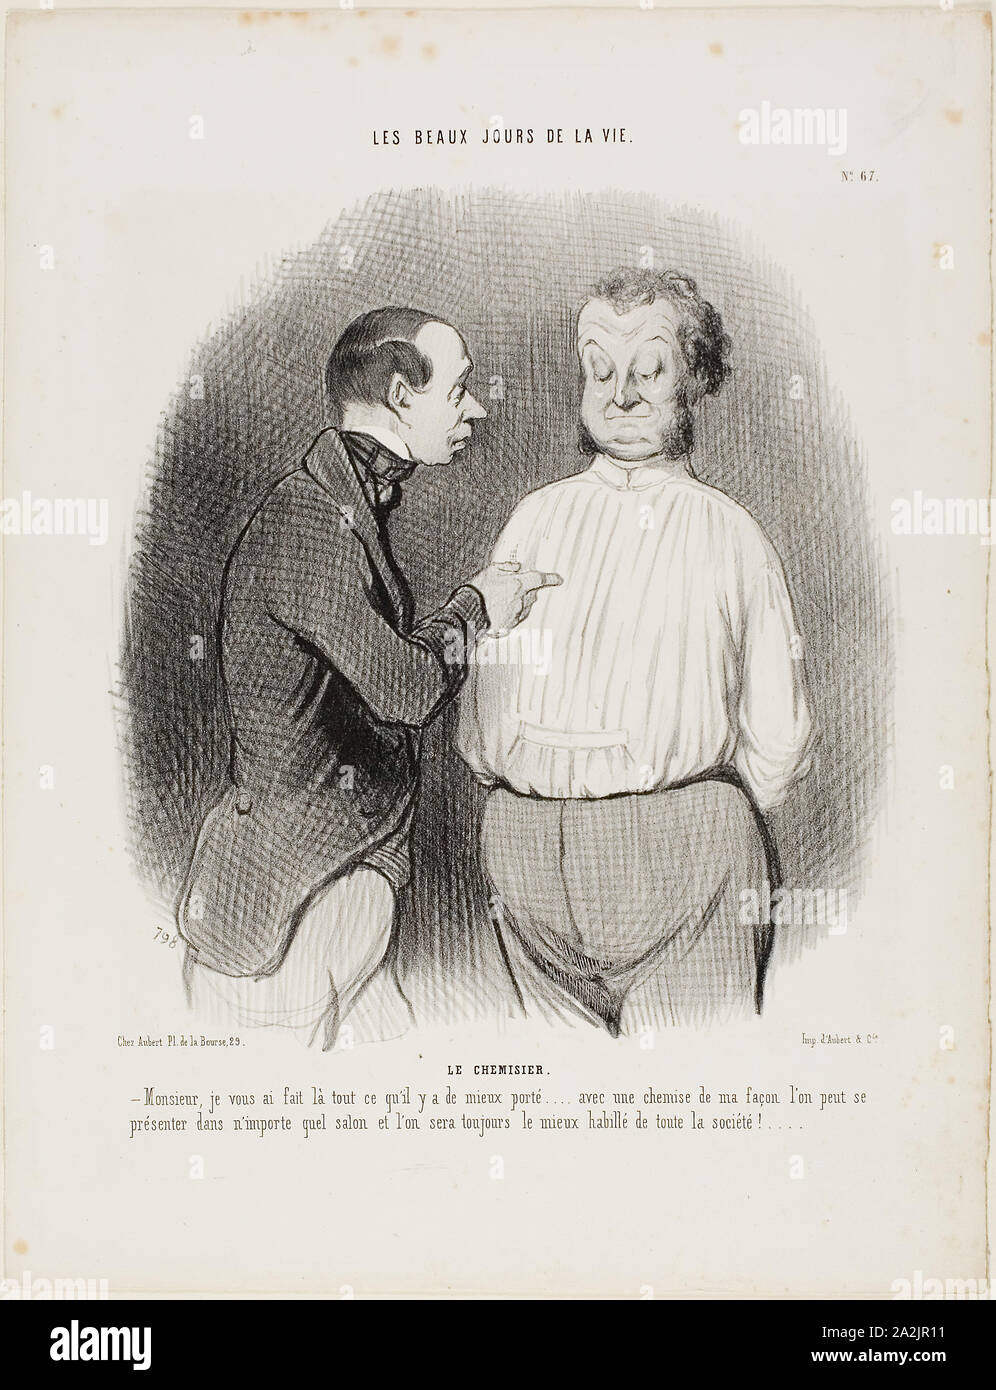 The Shirt Maker. Sir, I have tailored here for you the best that is presently available….. with a shirt of my making one can present oneself in no matter what Salon and one will always be the best dressed man of the party, plate 67 from Les Beaux Jours De La Vie, 1845, Honoré Victorin Daumier, French, 1808-1879, France, Lithograph in black on white wove paper, 243 × 222 mm (image), 358 × 275 mm (sheet), Panel, Empire period, c. 1805/15, France, Silk, warp-float faced 7:1 satin weave self-patterned by ground wefts bound in weft-float faced 1:3 twill interlacings, five panels joined, 165.8 × 74. Stock Photo